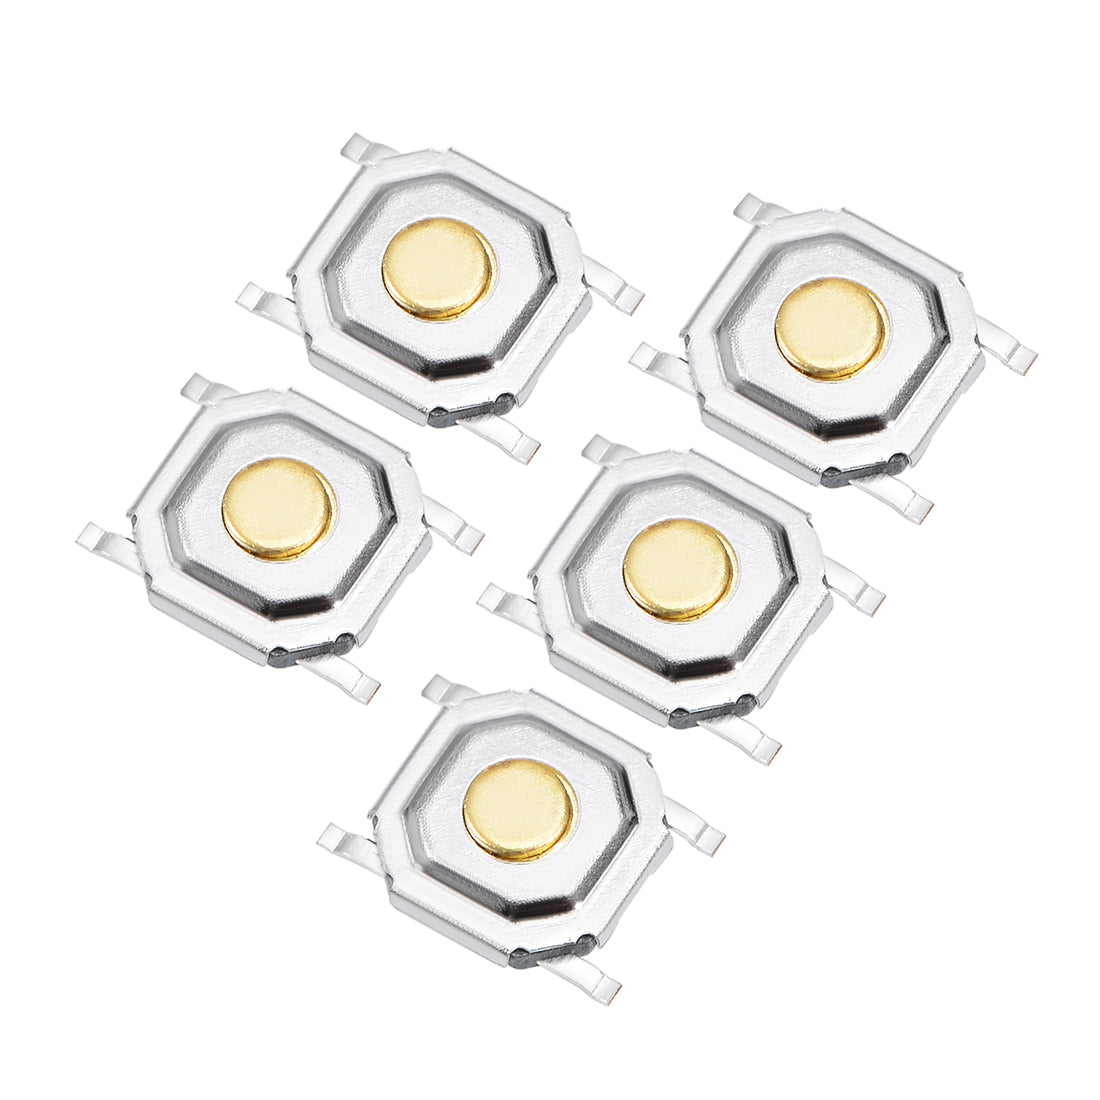 uxcell Uxcell 5PCS 5x5x1.5mm Momentary Panel PCB Surface Mounted Devices SMT Mount 4 Pins Push Button SPST Tactile Tact Switch